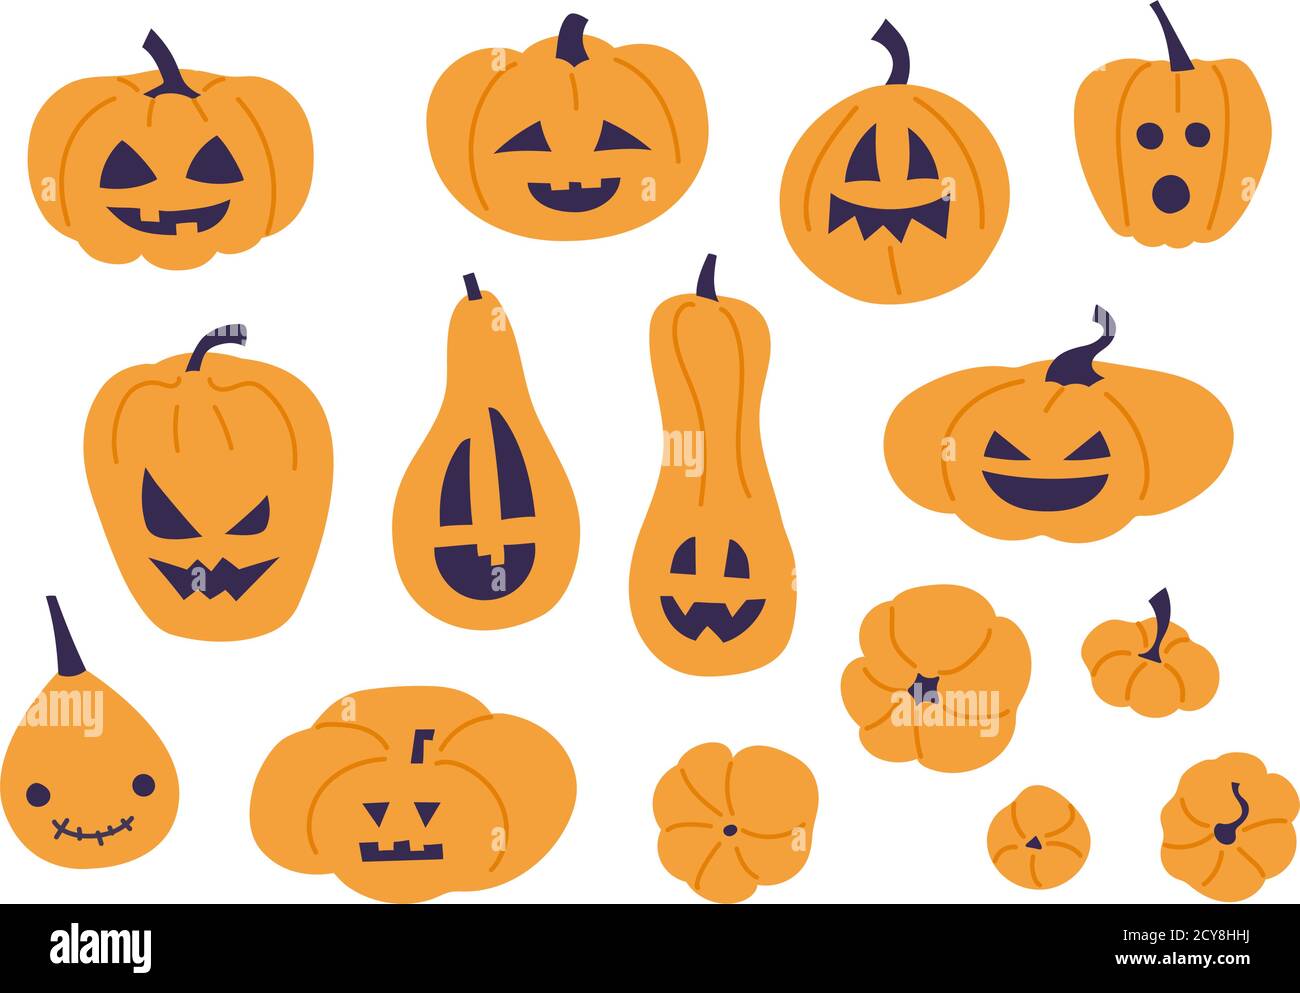 Set of vector illustrations for Halloween design isolated on a white background. Pumpkin collection. Scary, smiling, funny orange pumpkins. Stock Vector